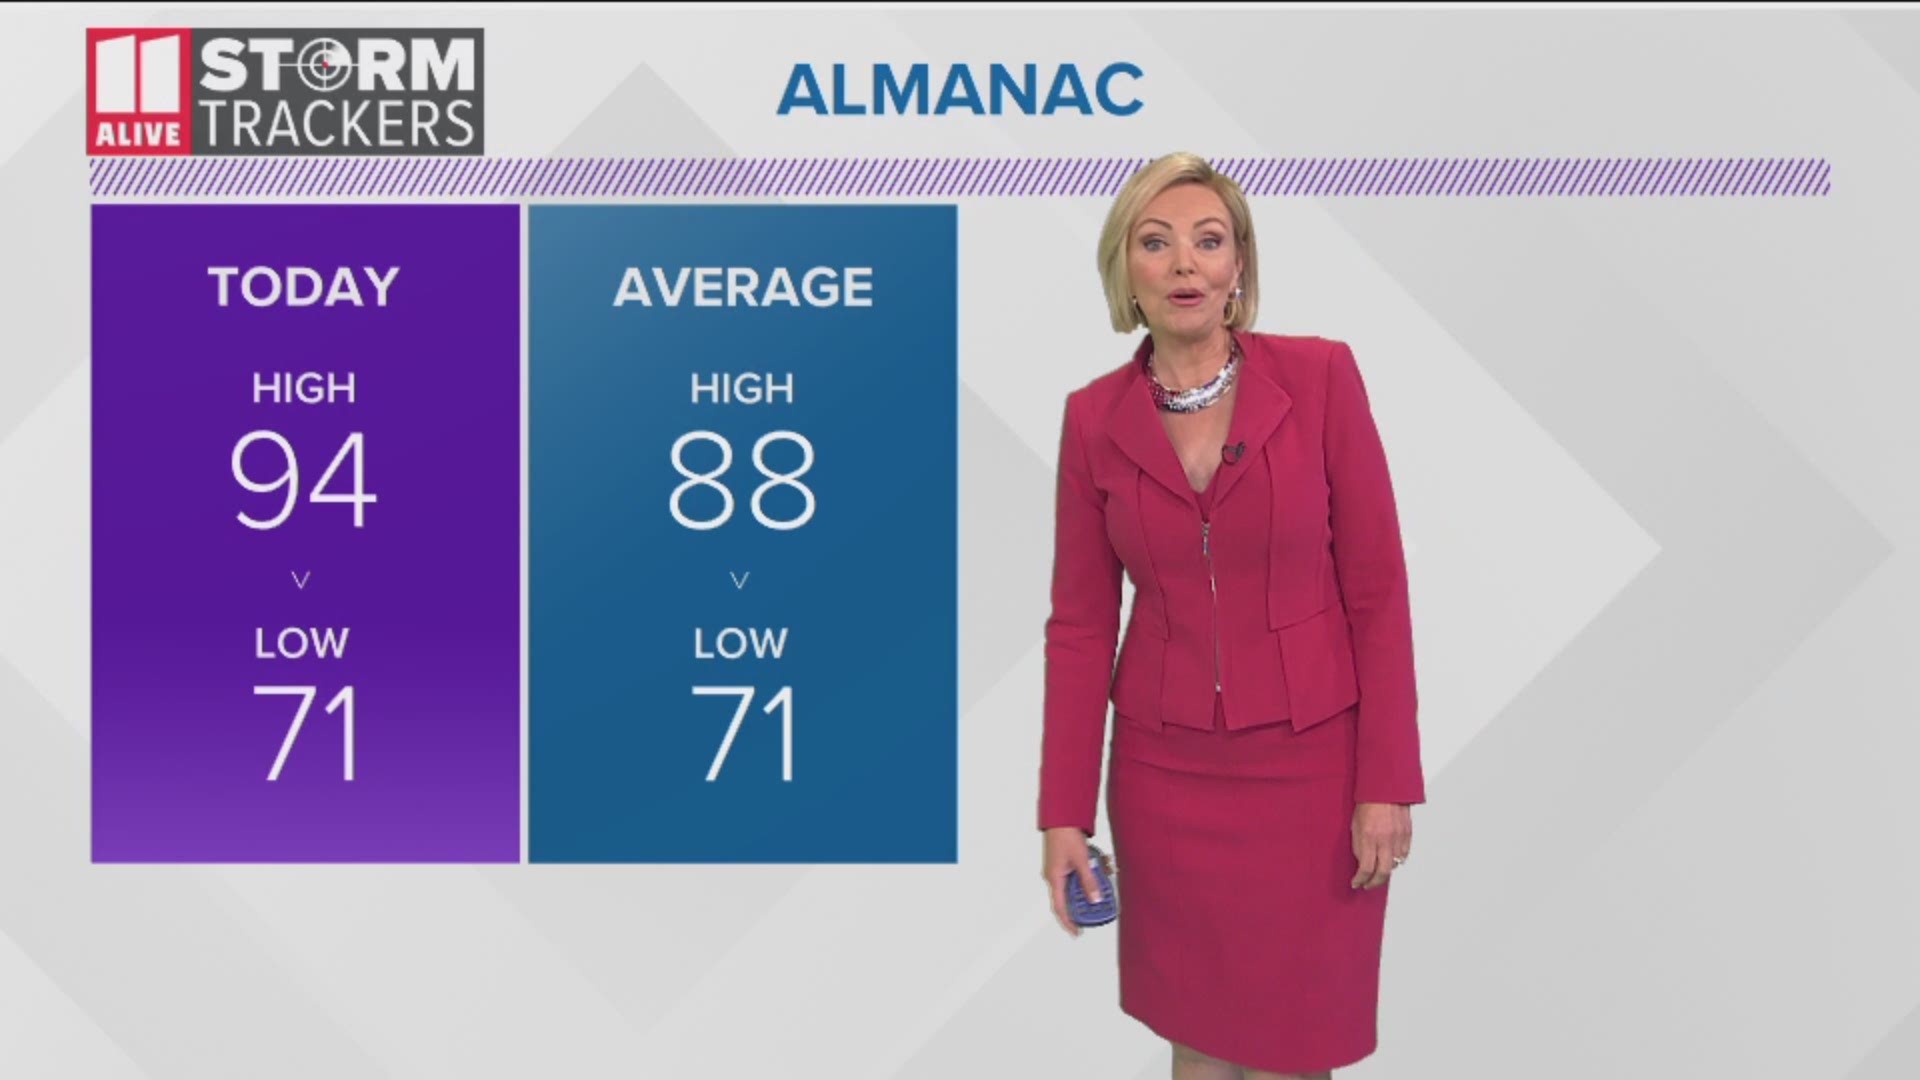 11Alive StormTracker and meteorologist Samantha Mohr has the forecast for Wednesday, Aug. 21, 2019.